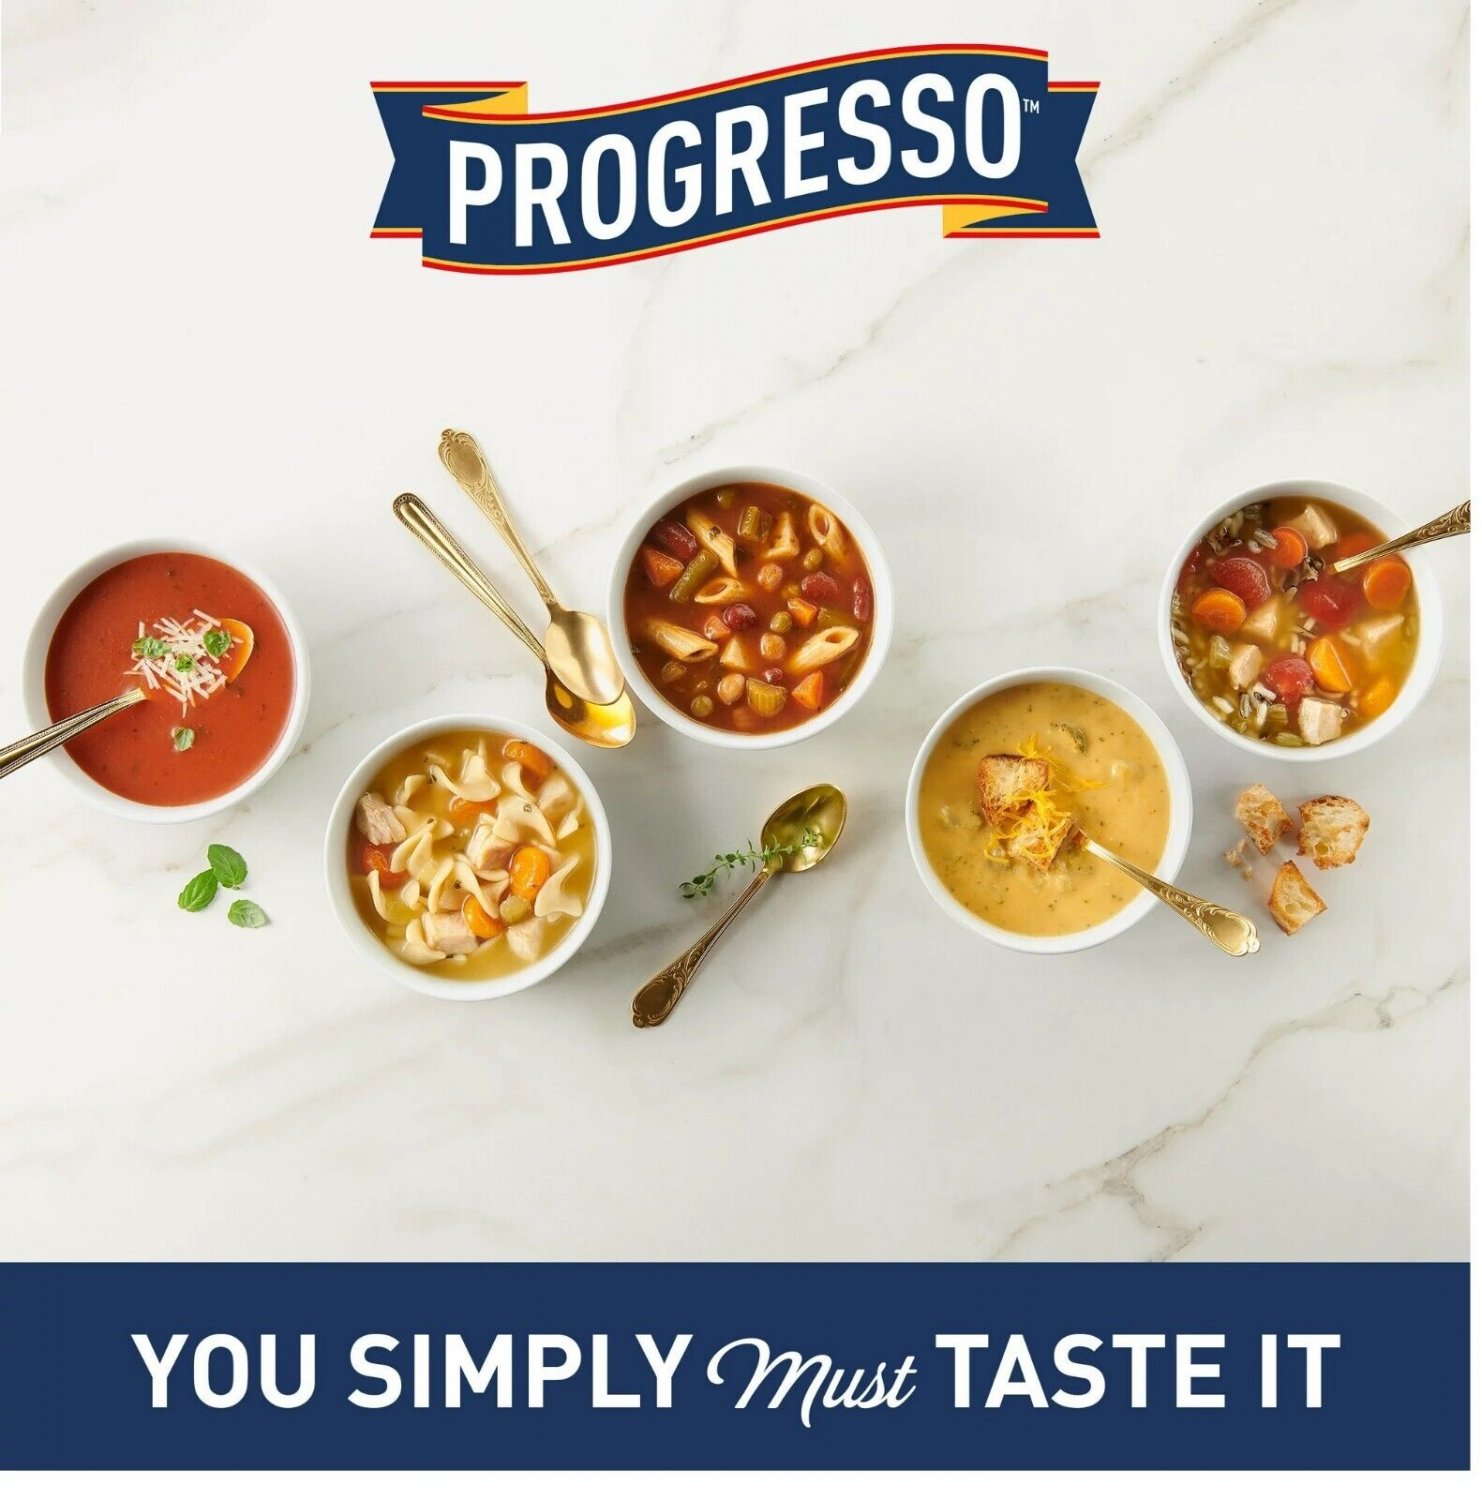 Progresso Traditional Italian-Style WEDDING Soup 18.5oz. (6 Cans)